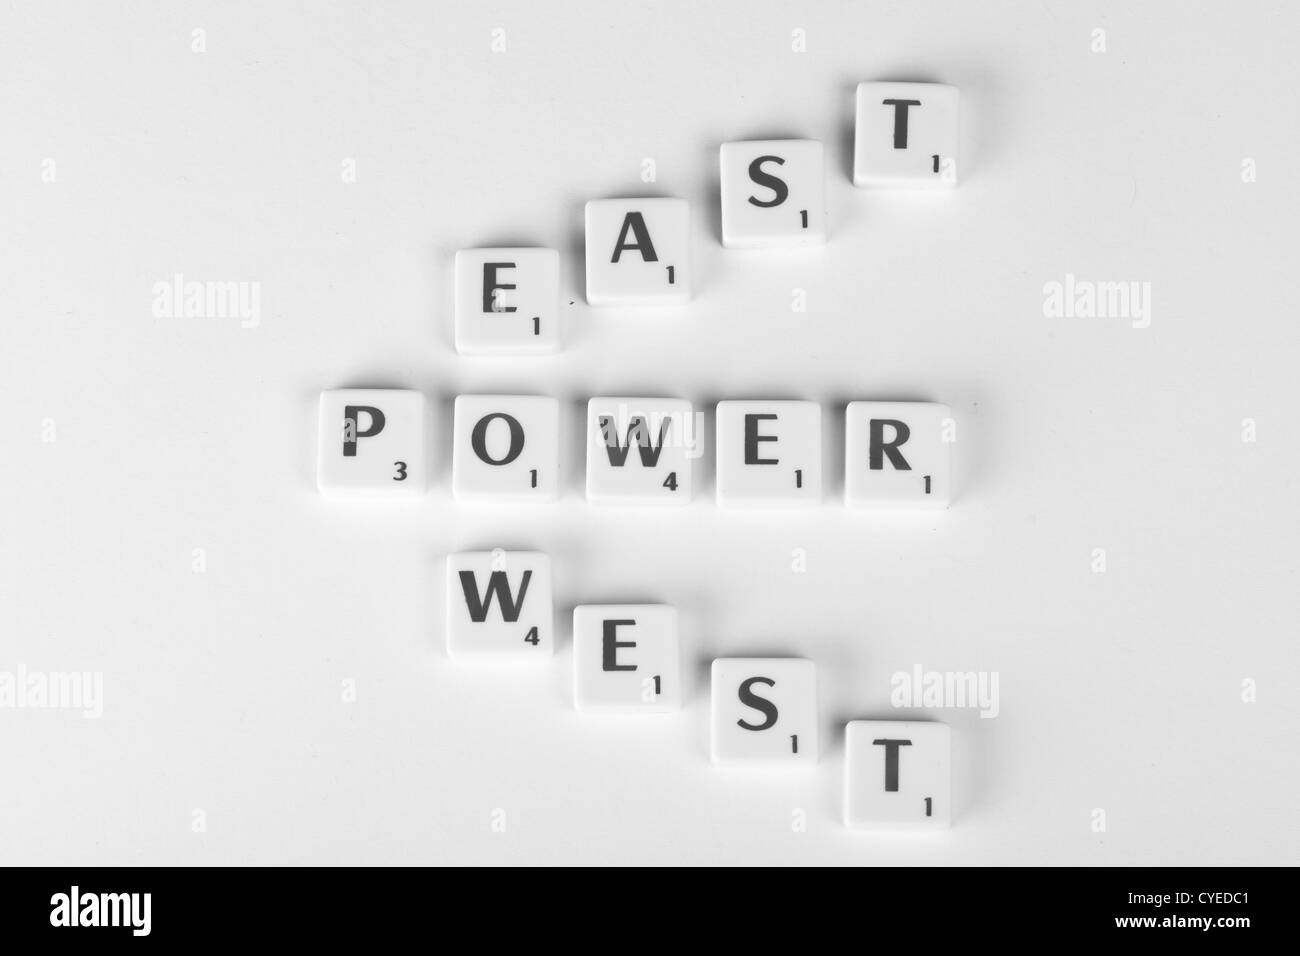 East verses West power wealth growth economies,east doing well while the west is doing badly, symbolic symbol of world shift. Stock Photo